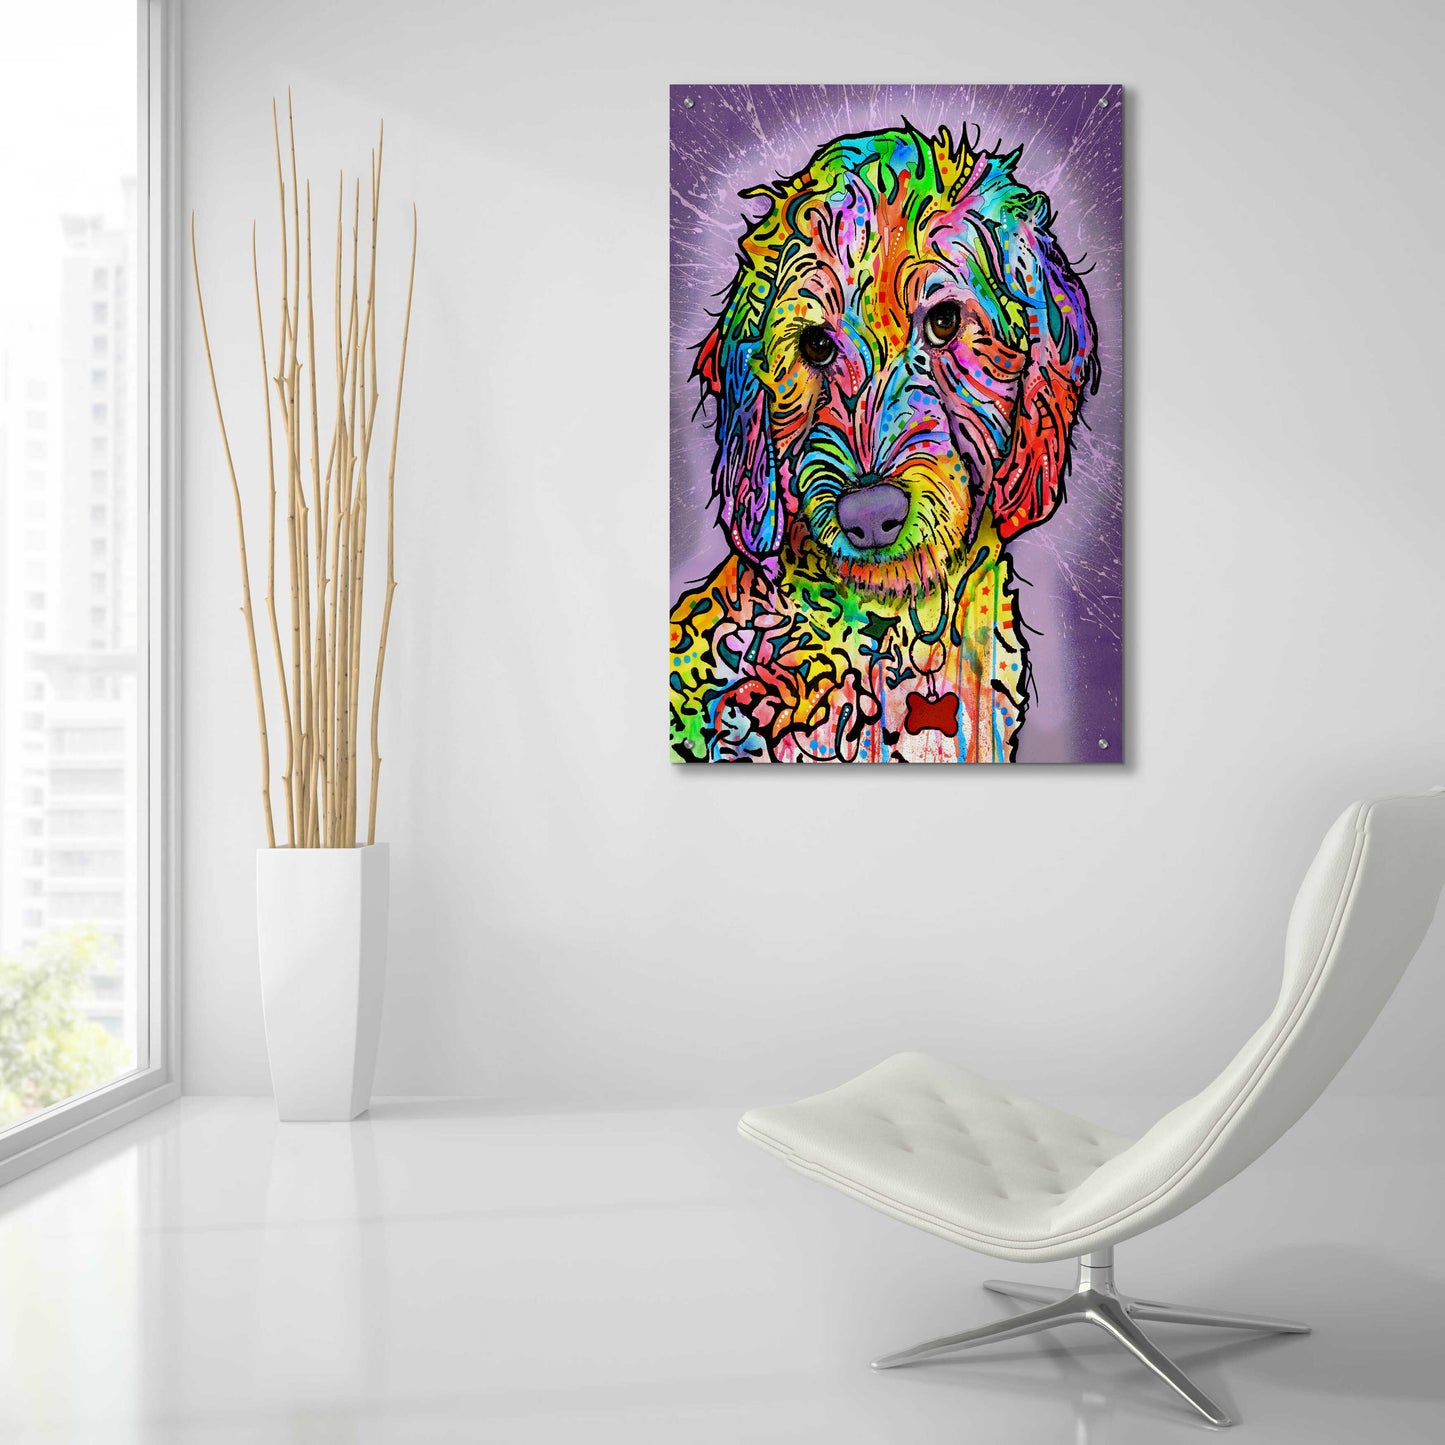 Epic Art 'Sweet Poodle' by Dean Russo, Acrylic Glass Wall Art,24x36